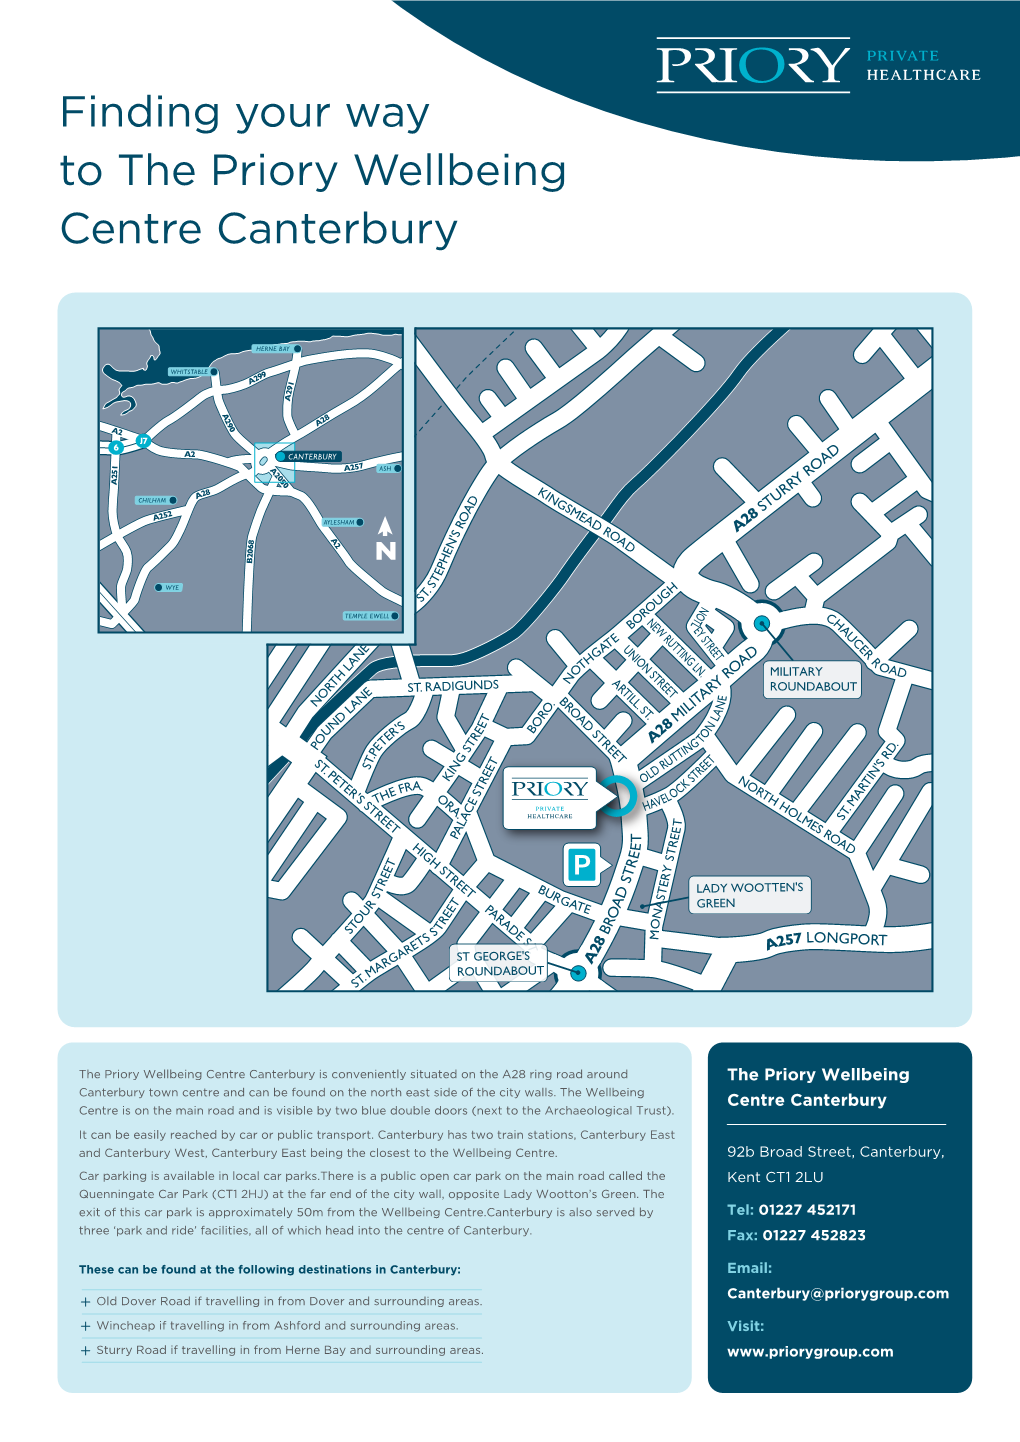 Directions to Canterbury Wellbeing Centre.Pdf